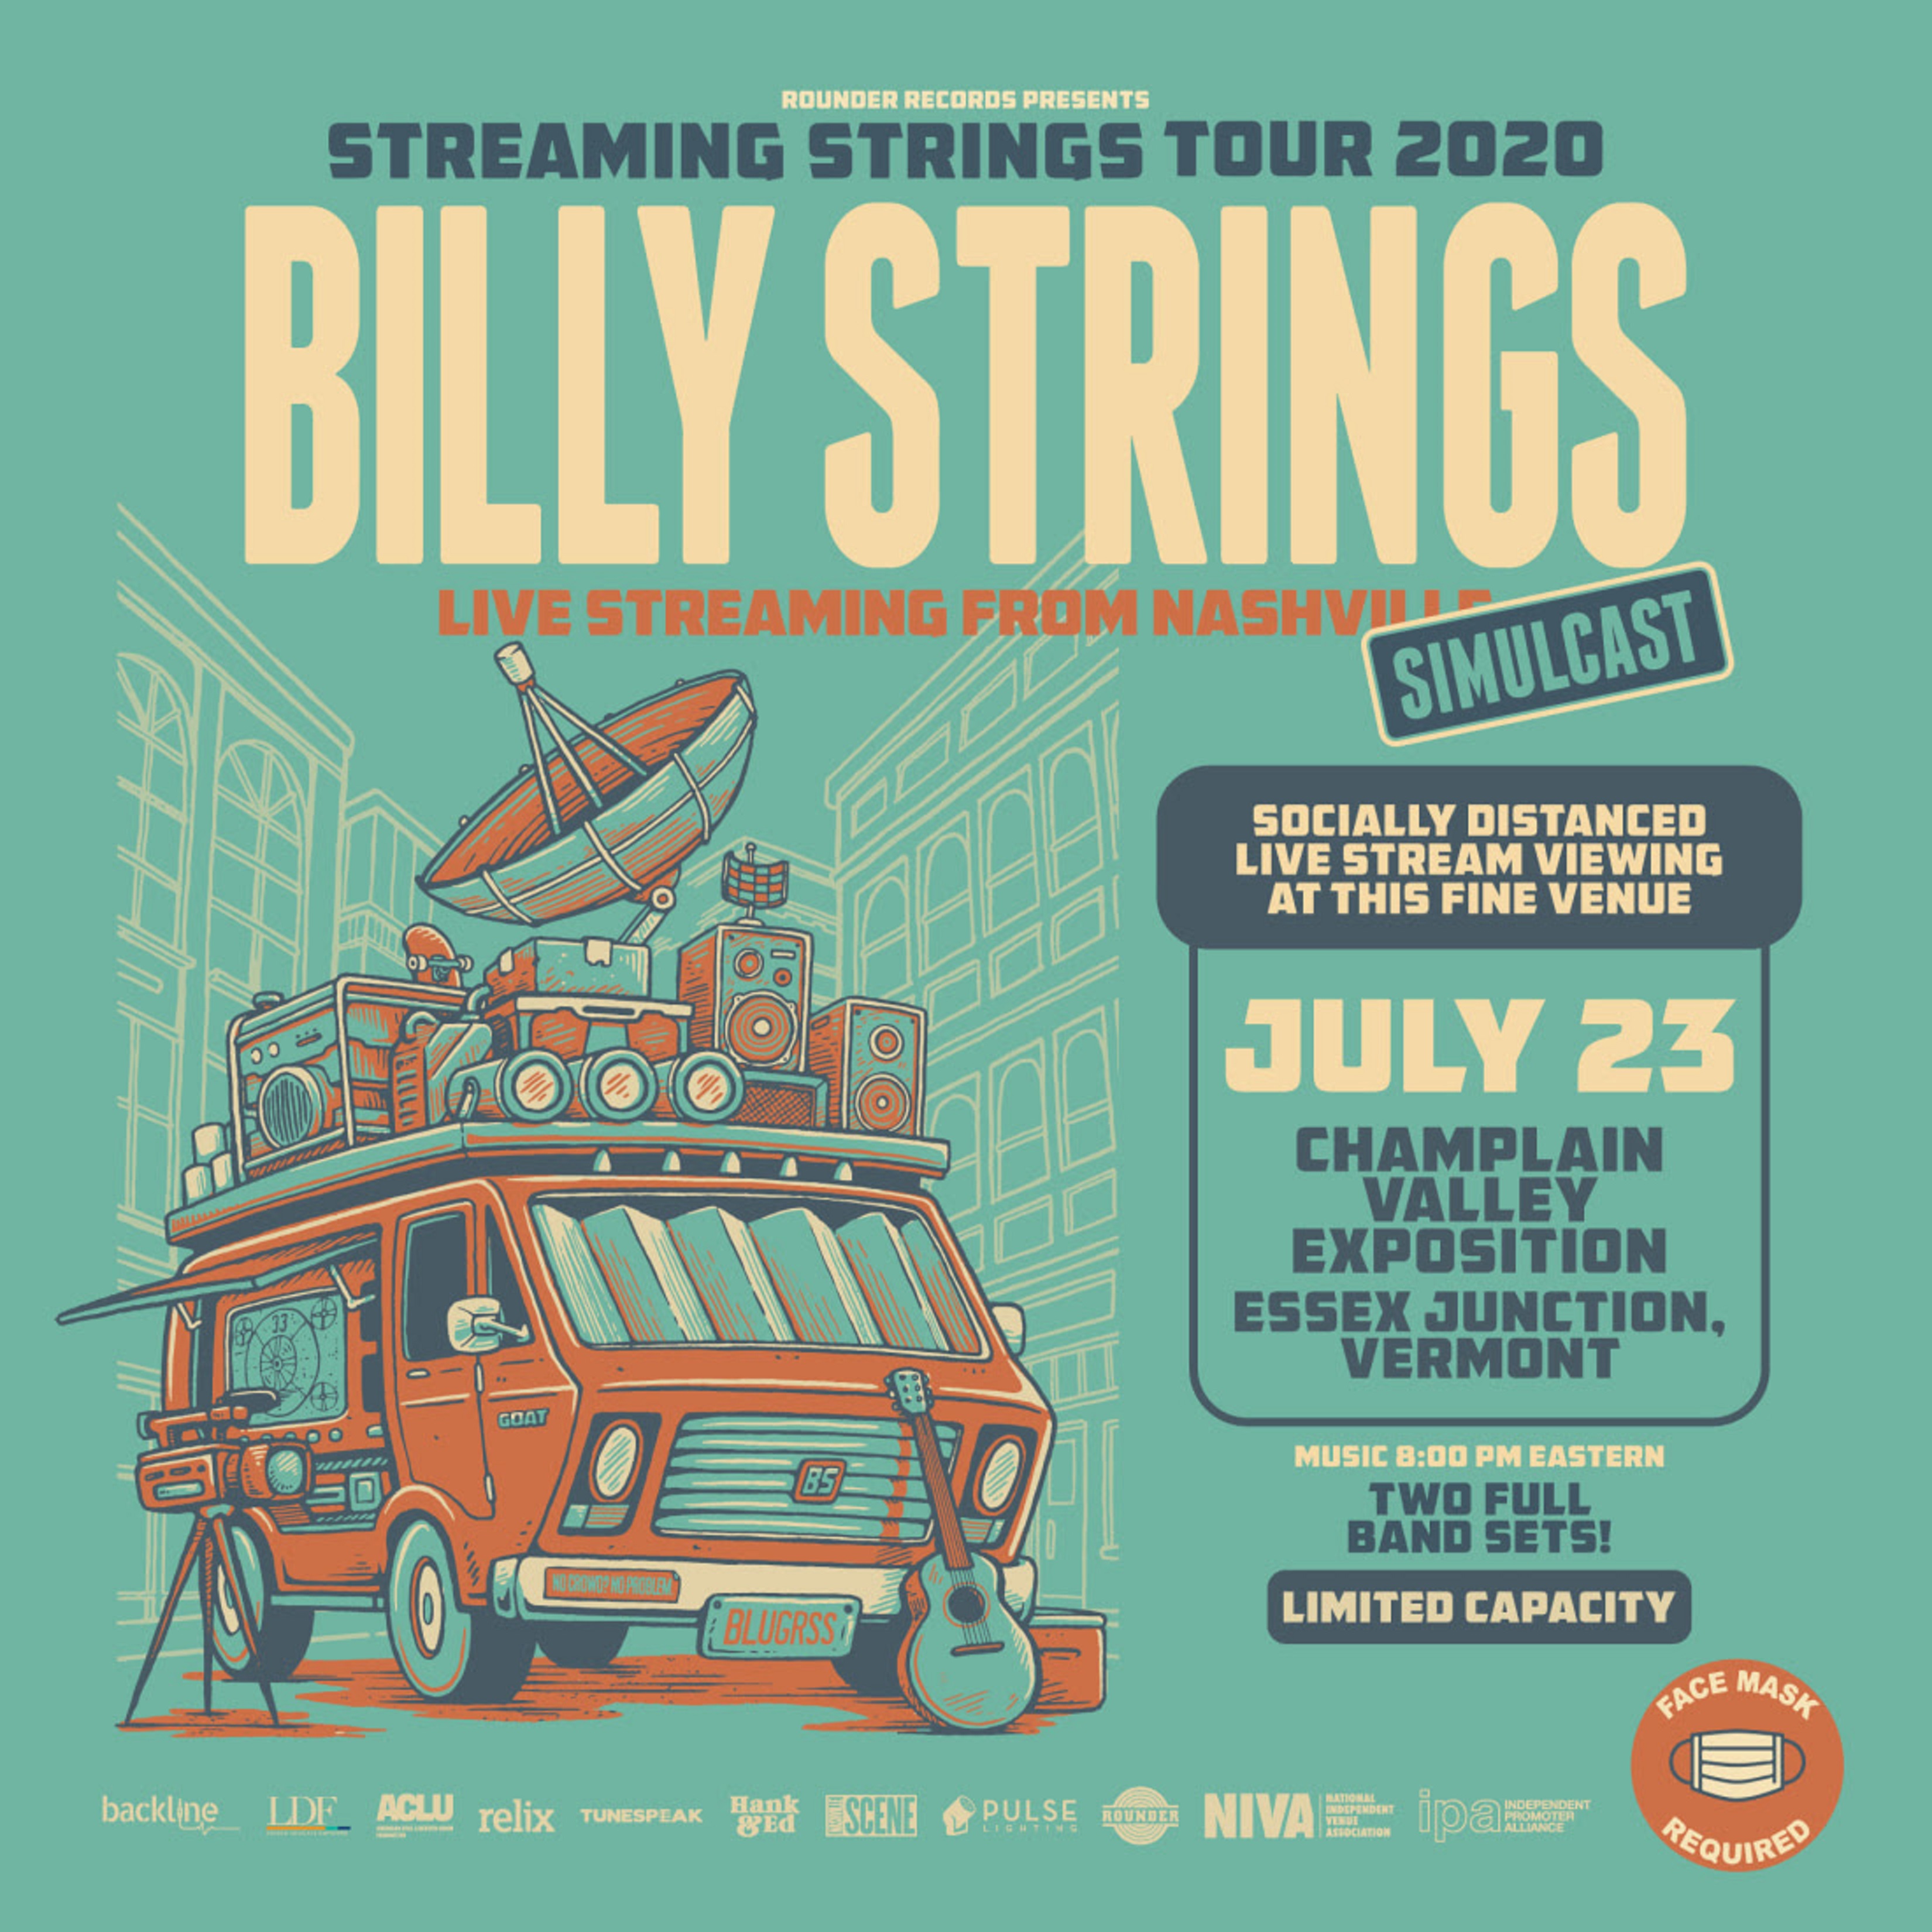 Billy Strings Simulcast 7/23 at the Higher Ground Drive-In Experience